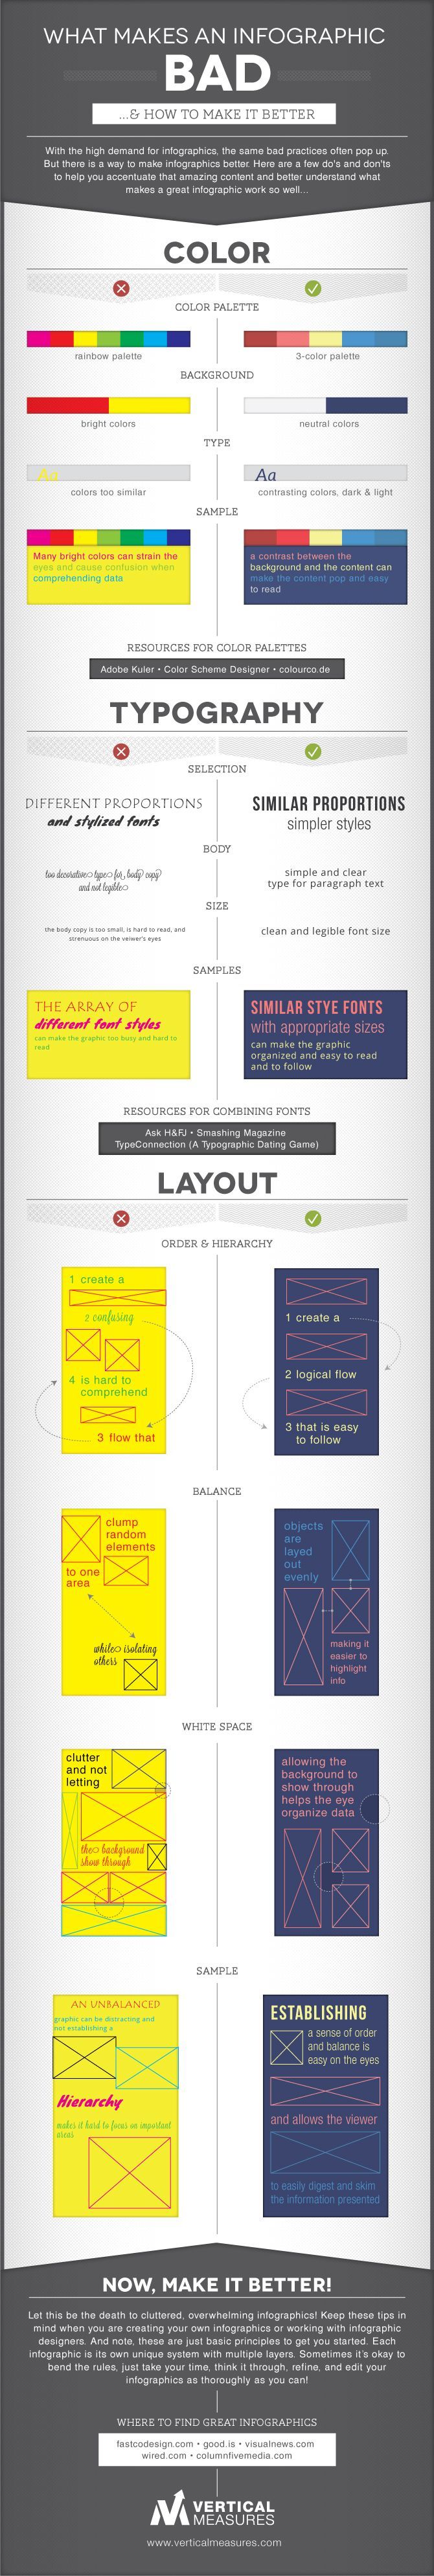 What Makes an Infographic Bad and How to Make it Better #infographic